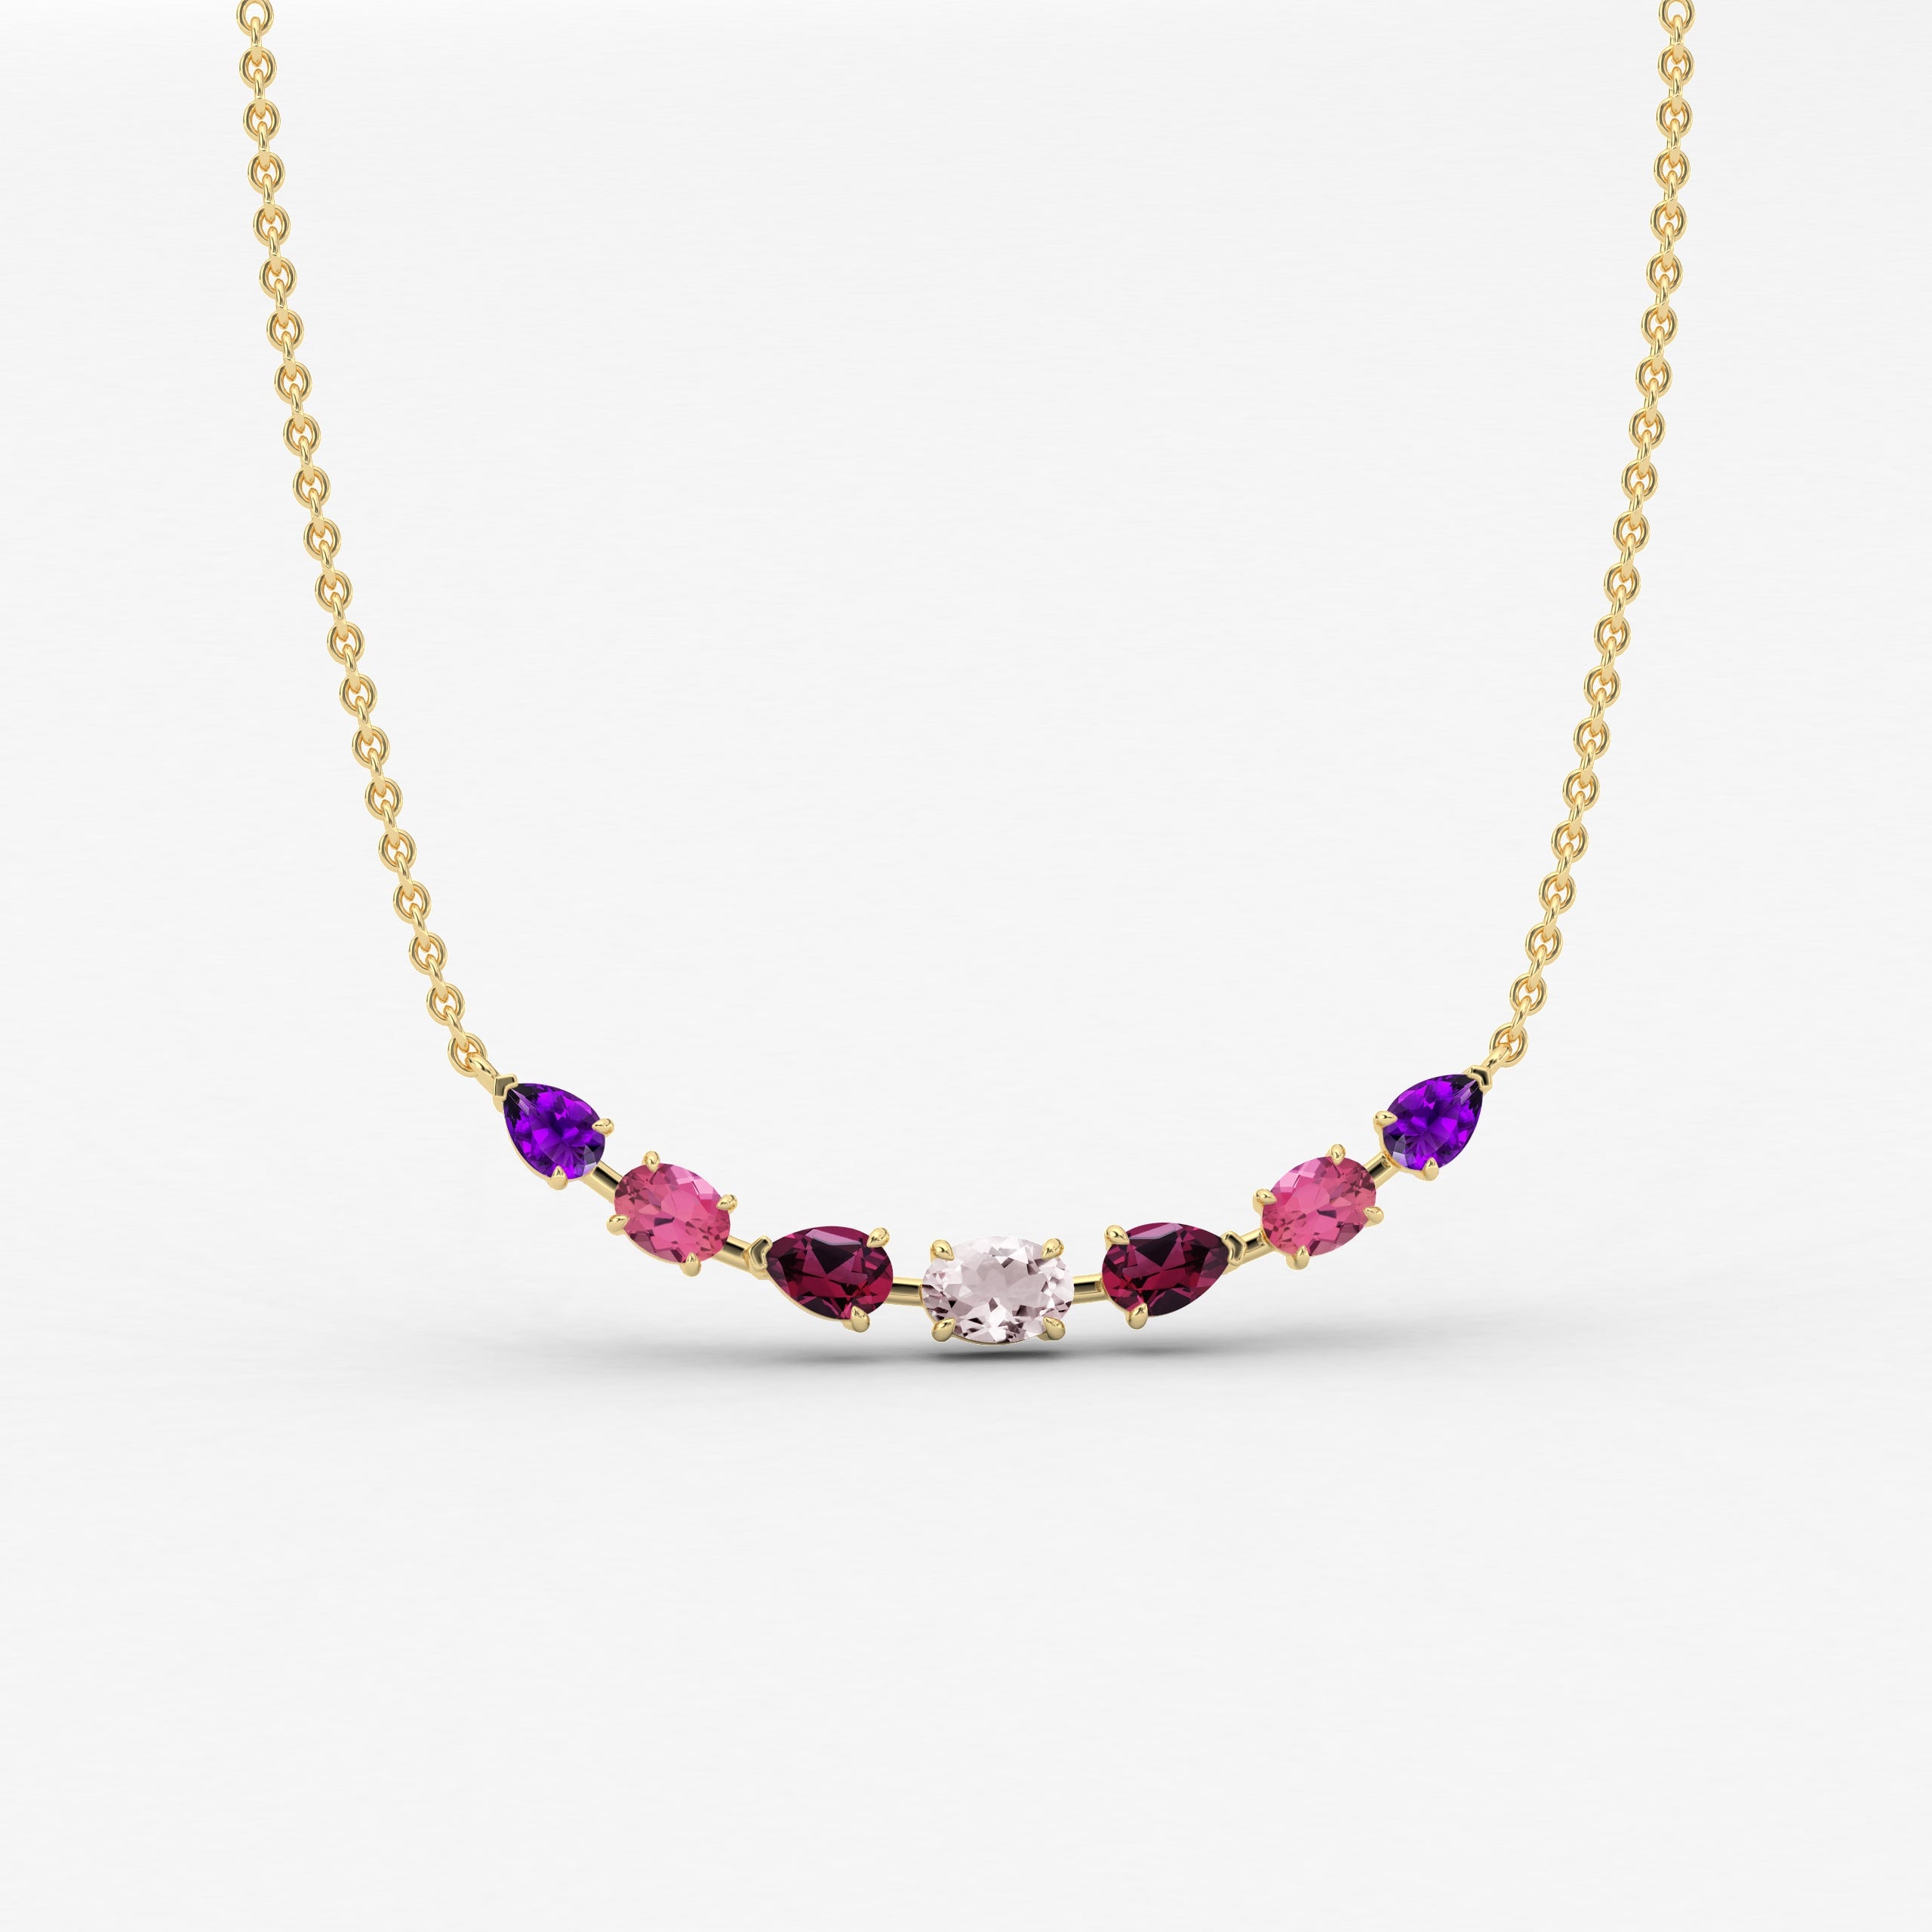 precious stone necklace in yellow gold